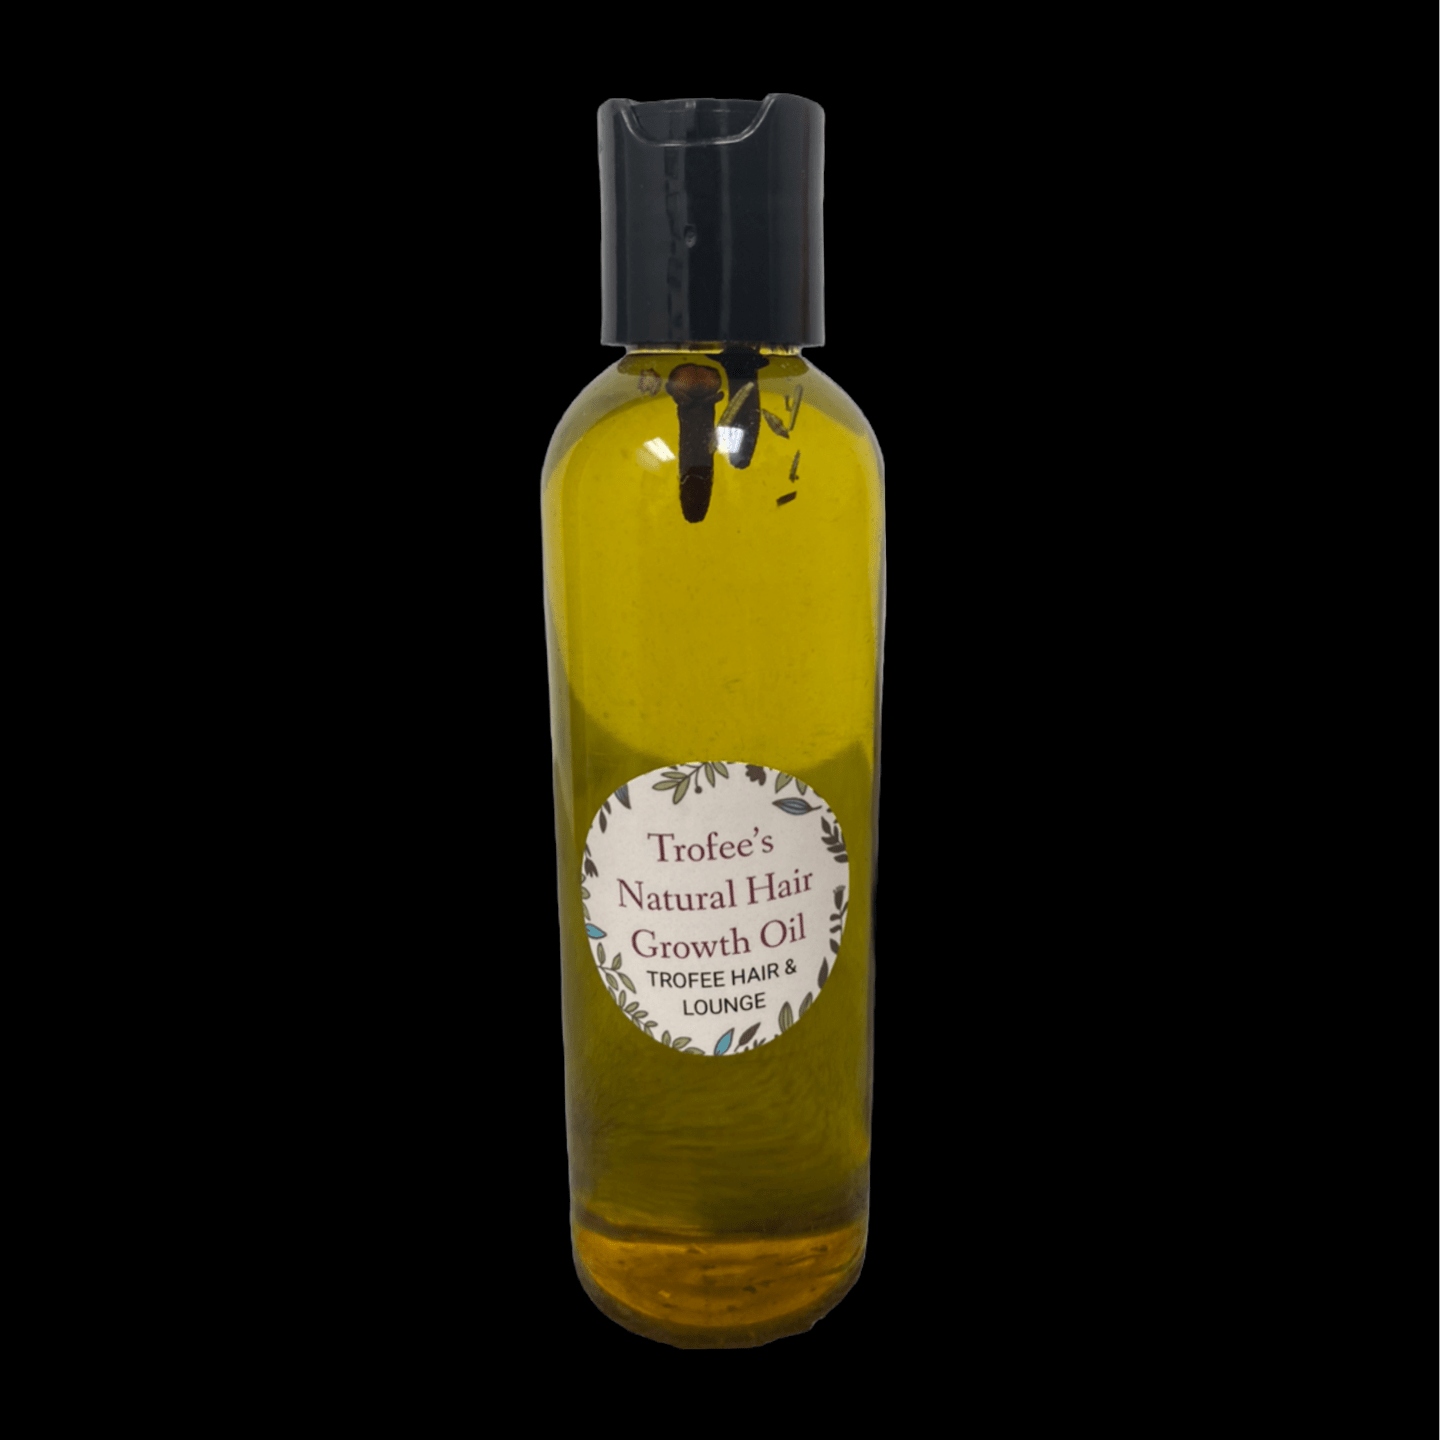 Trofee's Natural Hair Growth Oil - My Store